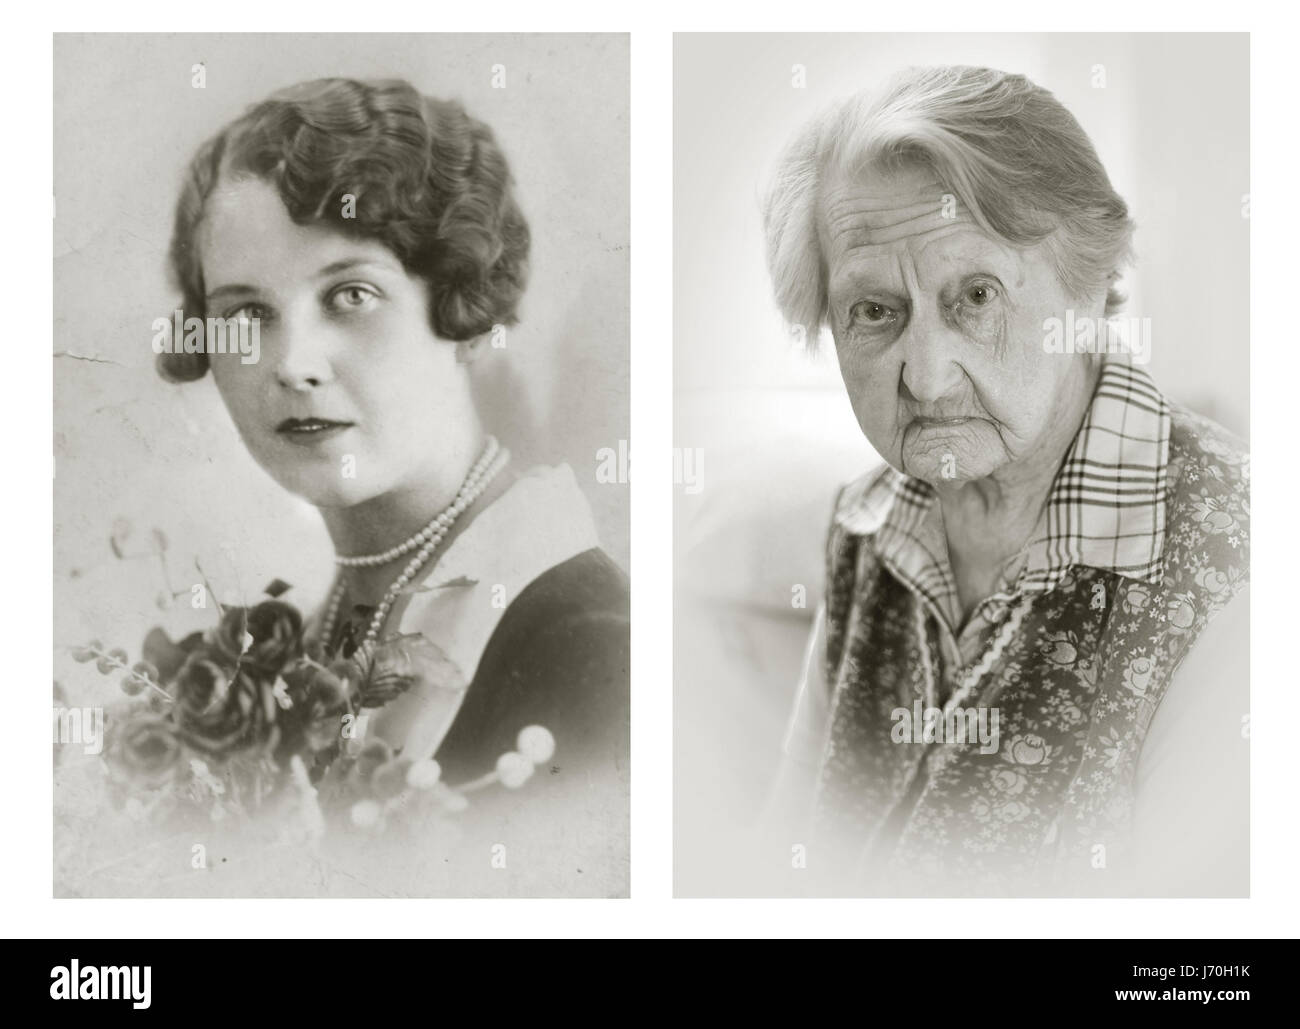 Anna Vašinová. Left: 22 years old, right: 102 years old. She was a farmer and now lives in a retirement home in Sloupnice. She remembers her husband being taken away by the Nazis and wishes to see him again after death. POIGNANT portraits have posed centenarians alongside their younger selves in a project called Faces of Century. The incredible images tell the unique stories of each person’s life including one woman who was in the truck that hit and killed high-ranking German Nazi official Reinhard Heydrich’s son Klaus in 1943. Another intriguing tale comes from a 101-year-old woman who decide Stock Photo